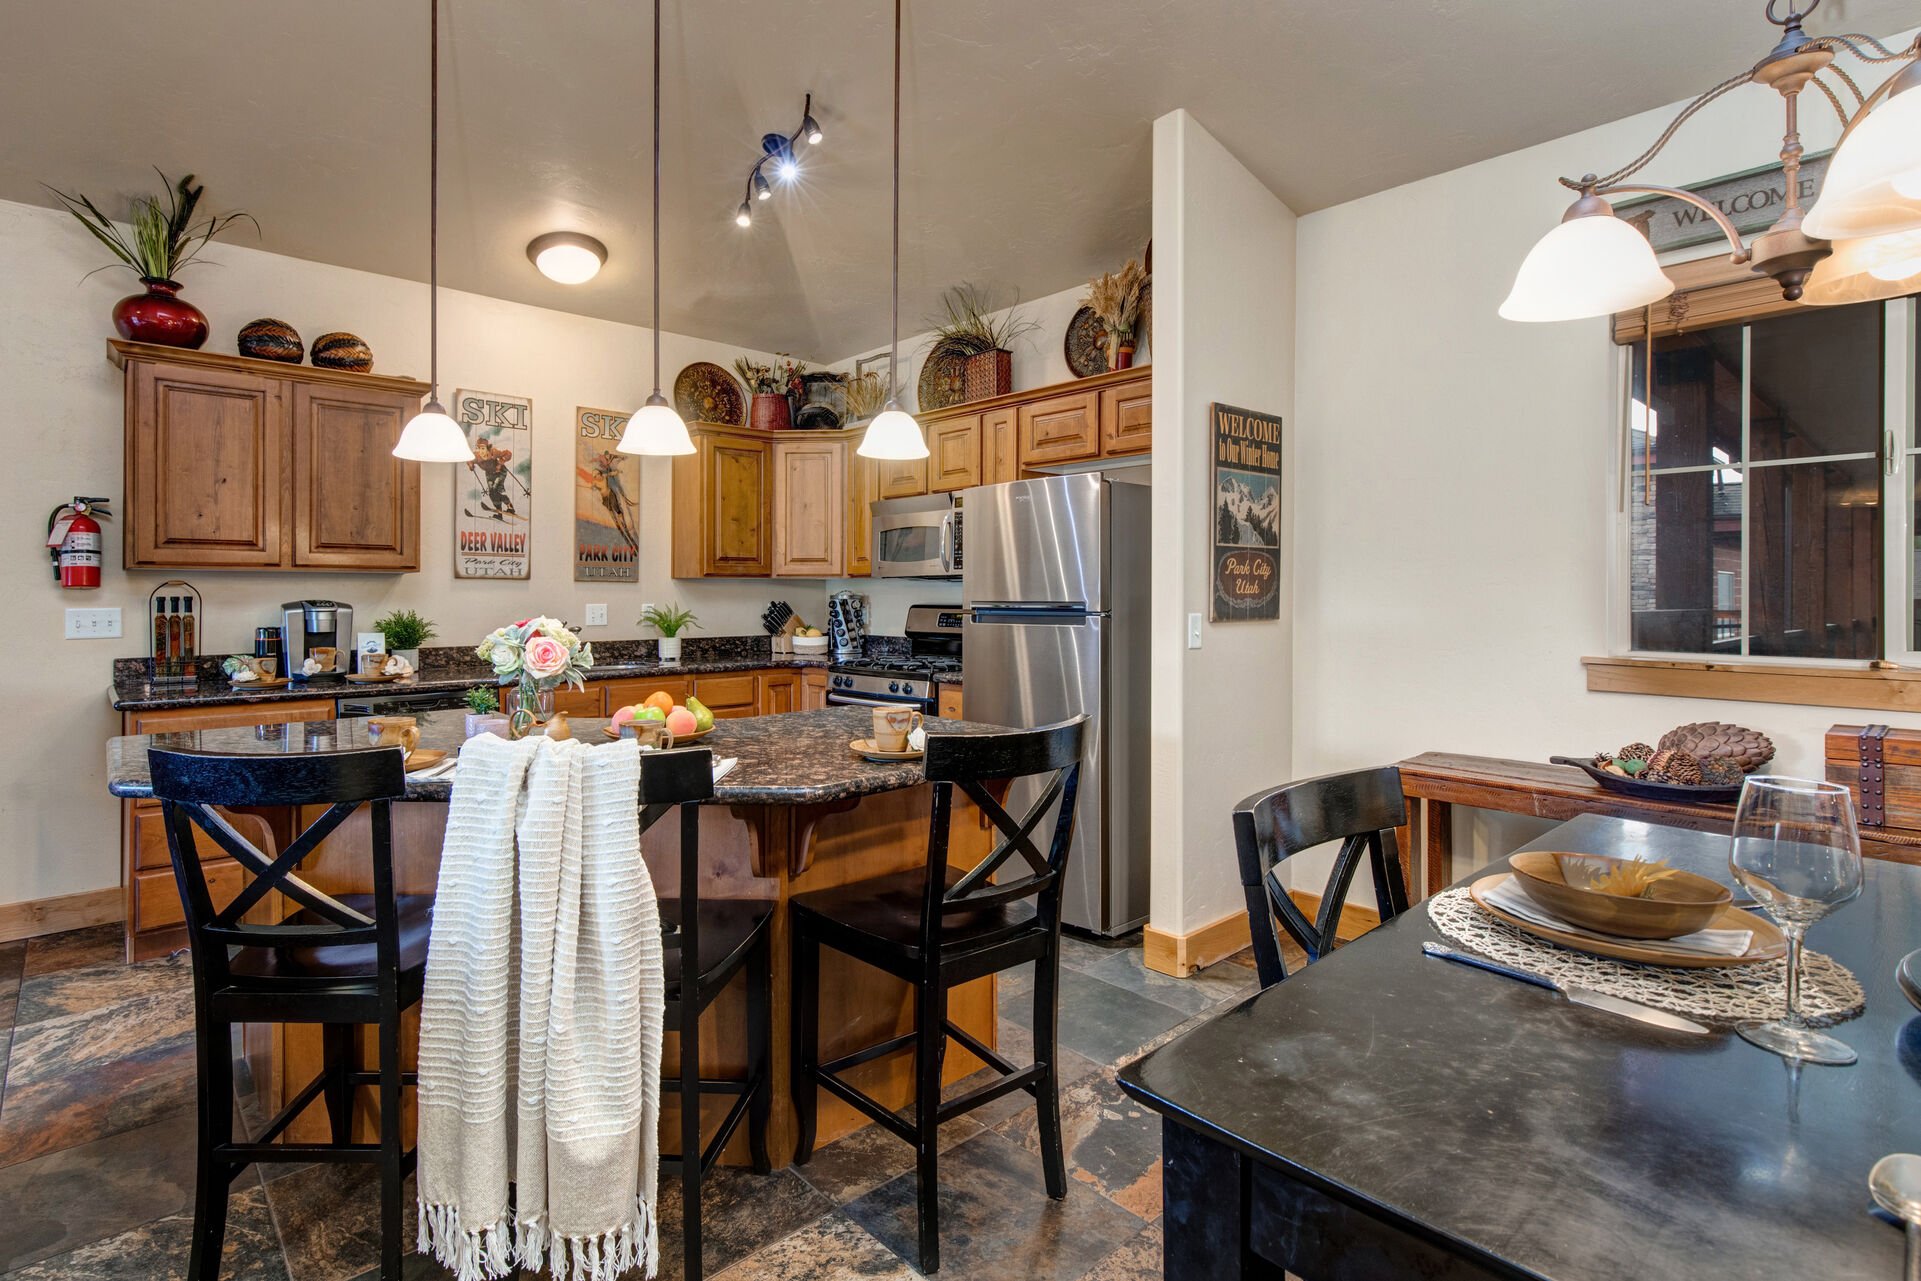 Fully Equipped Kitchen with stone countertops, stainless steel appliances, and island seating for three